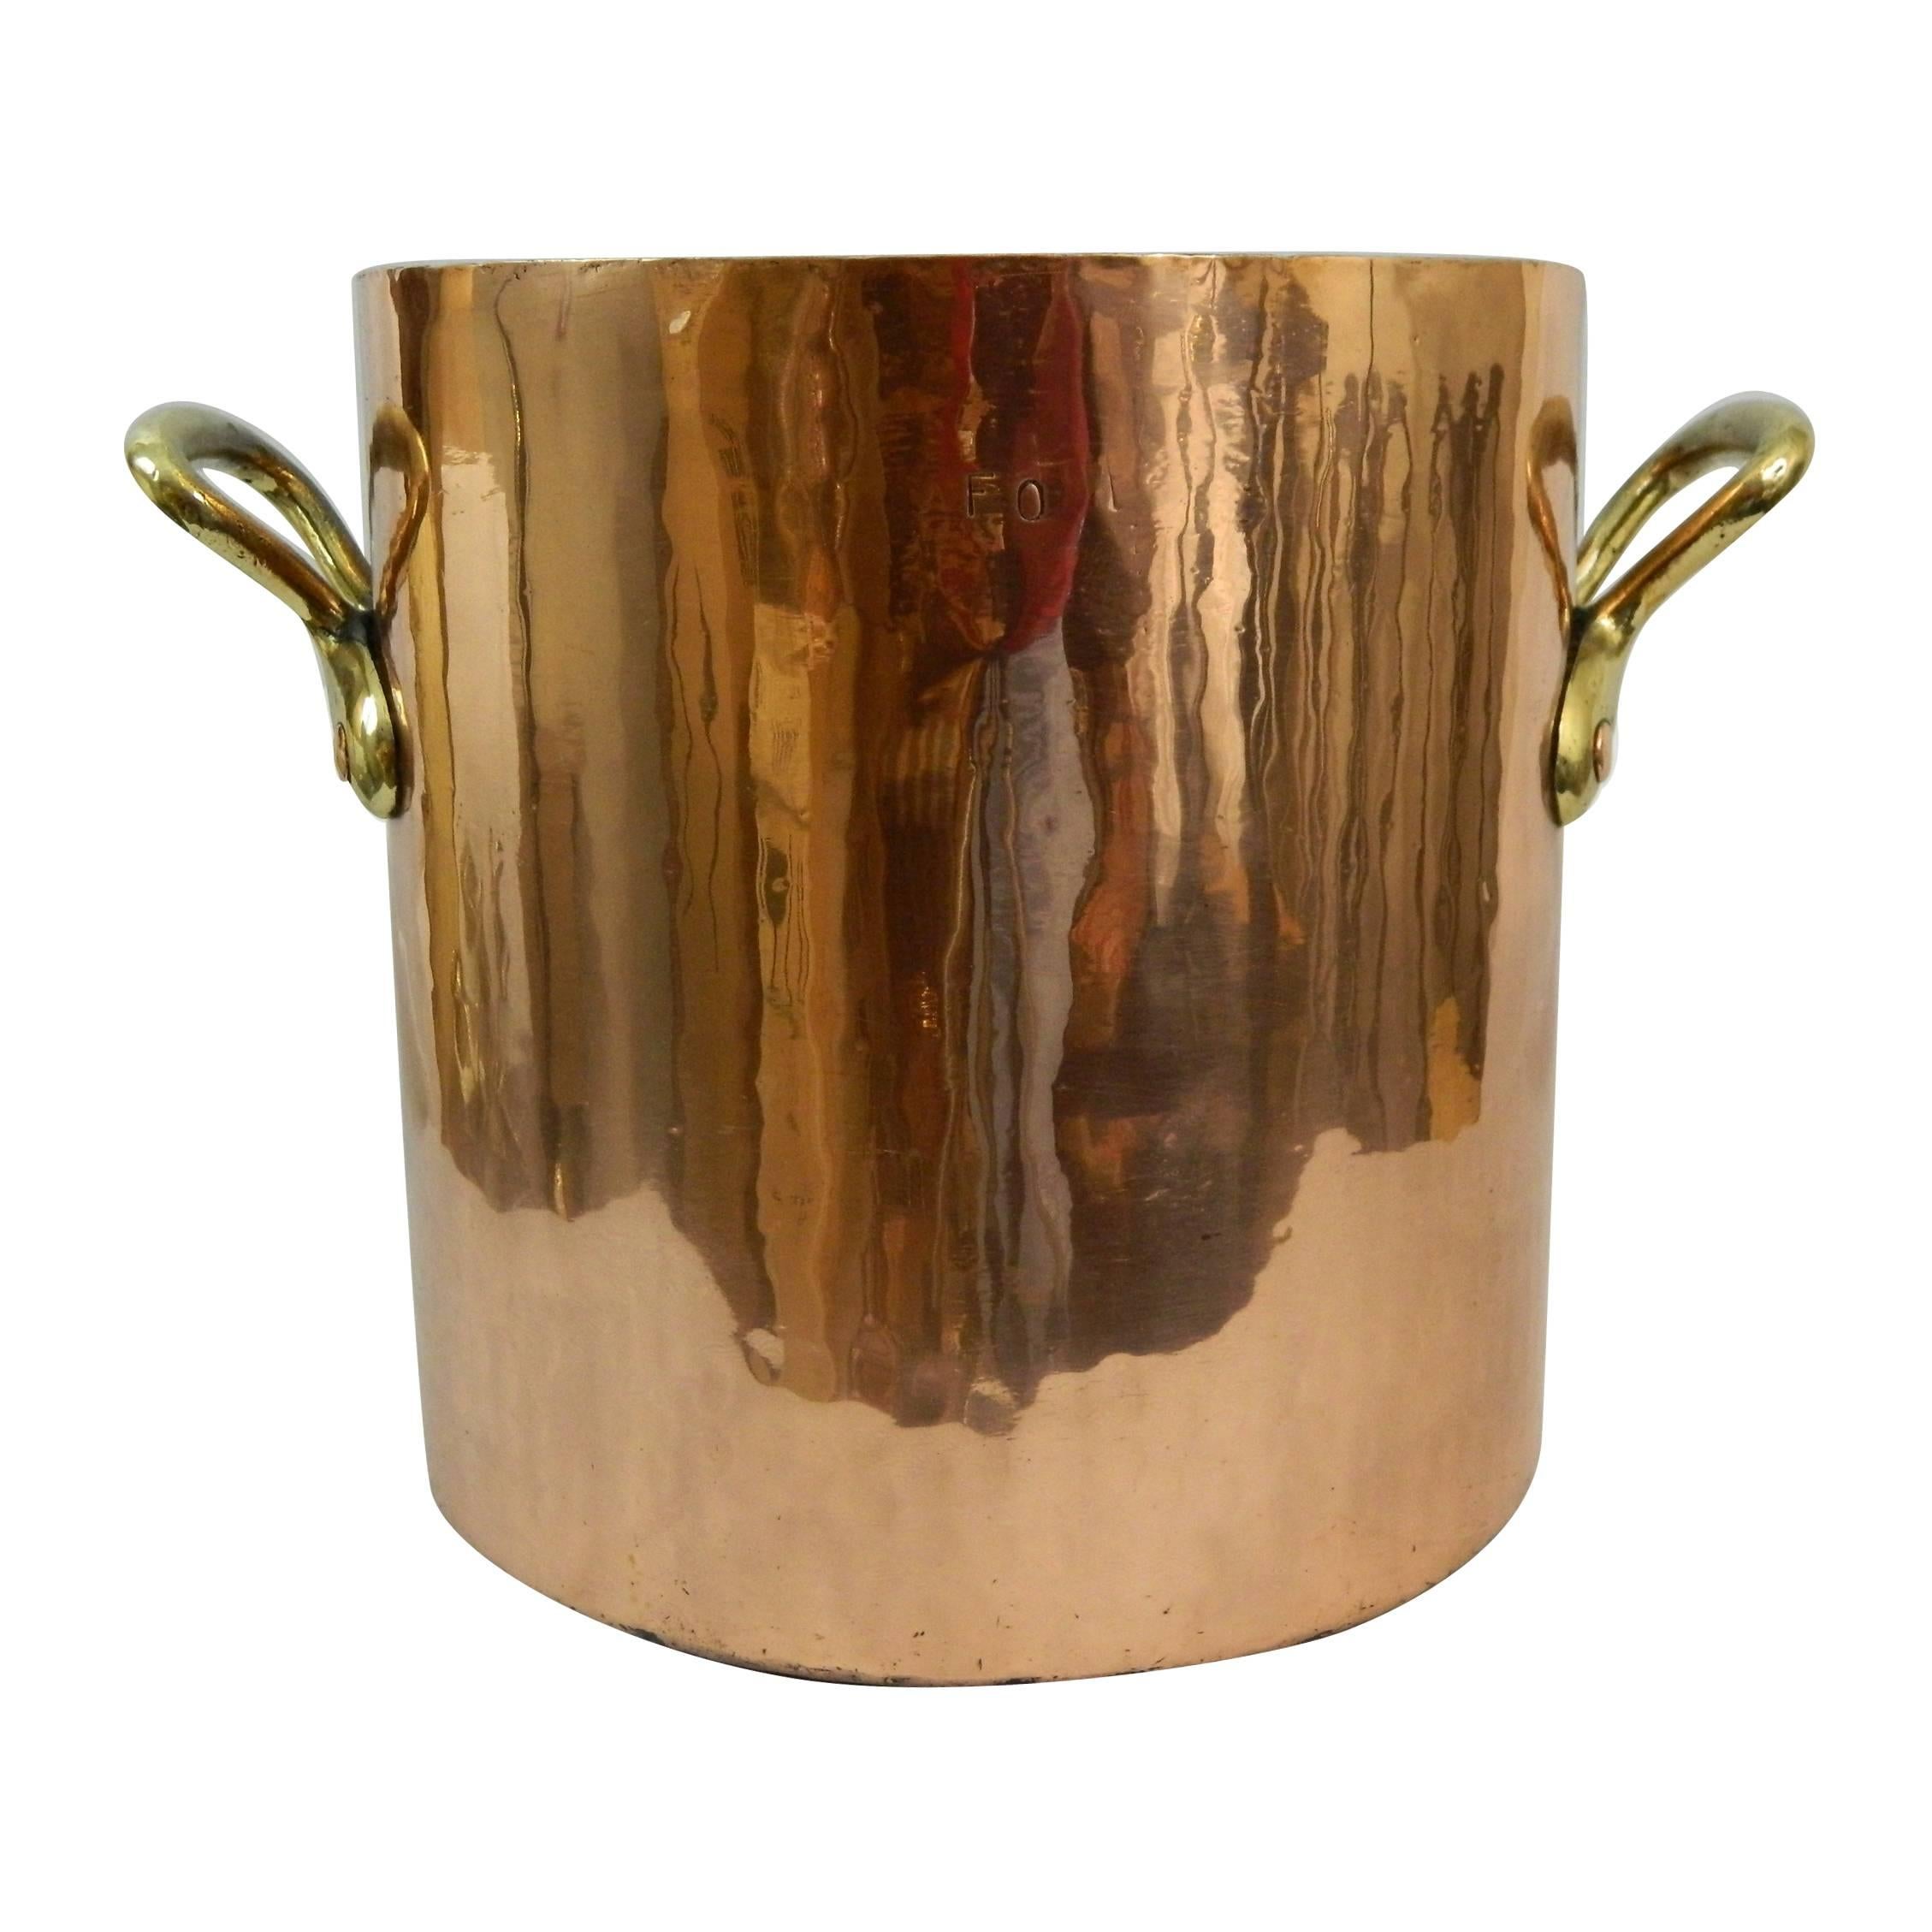 Large Copper 32 Quart Stock Pot with Brass Handles, 19th Century